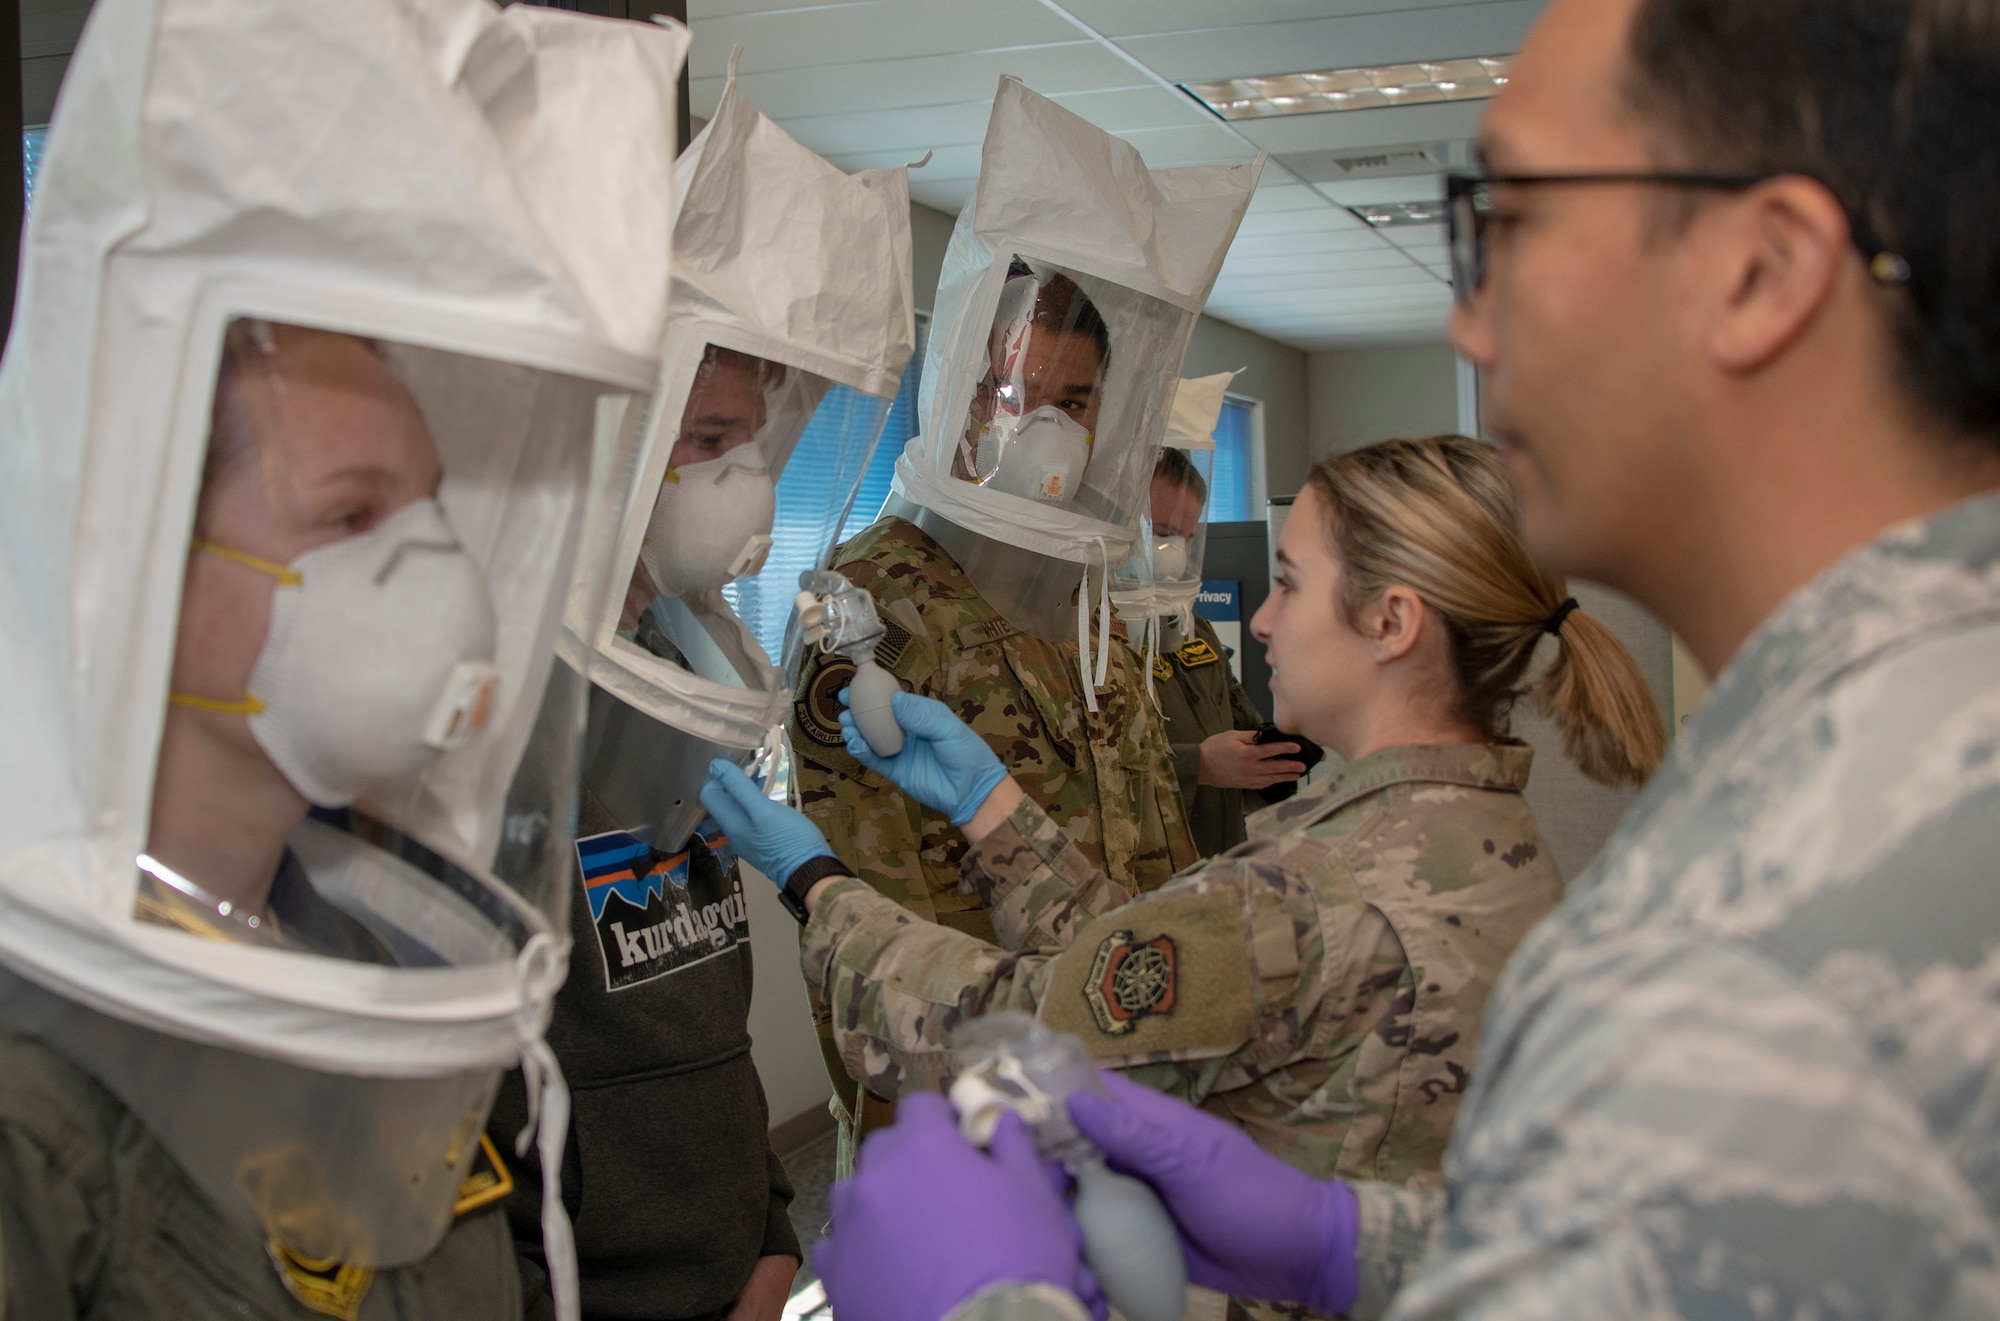 60th Aerospace Medicine Squadron Bioenvironmental Engineering Flight technicians perform N95 mask fit tests on aircrew members April 10, 2020, at Travis Air Force Base, California. The bioenvironmental engineering flights conducts respirator and gas mask fit tests to protect Airmen and maintain a healthy workforce. They also perform environmental, occupational and radiological surveillance. (U.S. Air Force photo by Heide Couch)